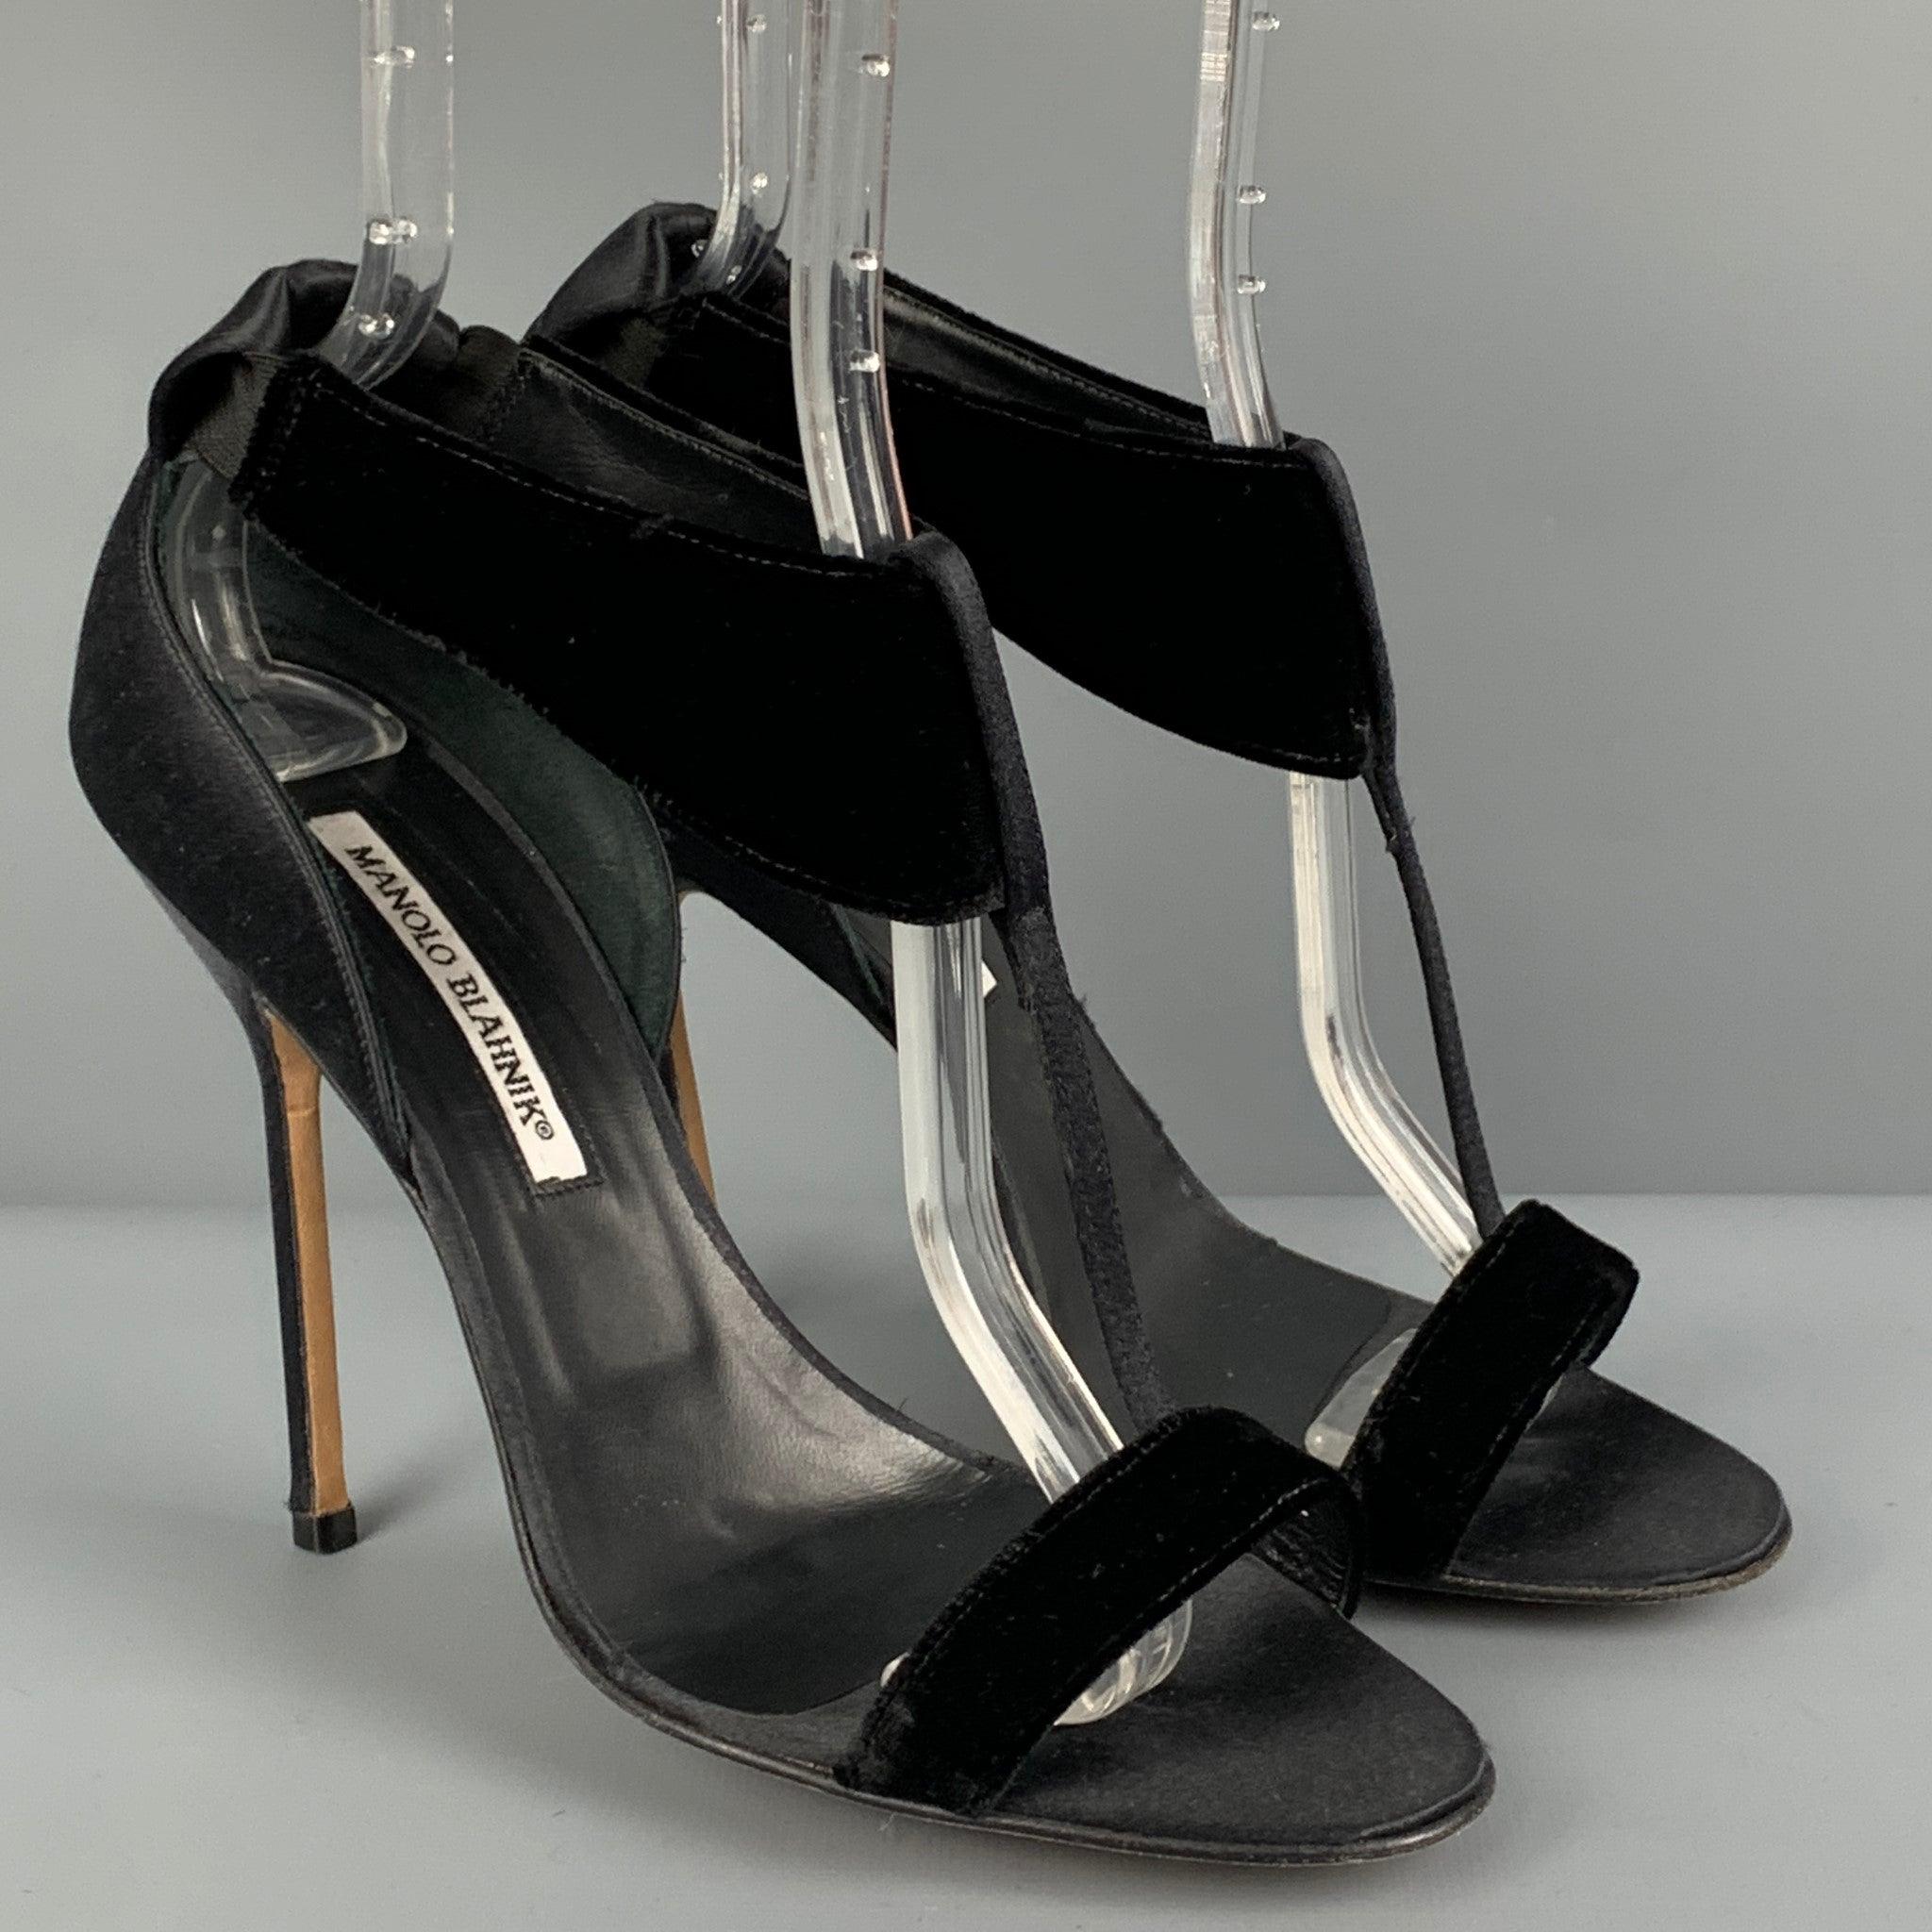 MANOLO BLAHNIK sandals comes in a black satin with a velvet trim featuring a t-strap style, open toe, and a stiletto heel. Made in Italy.
Very Good
Pre-Owned Condition. 

Marked:   39 

Measurements: 
  Heel: 4.5 inches 
  
  
 
Reference: